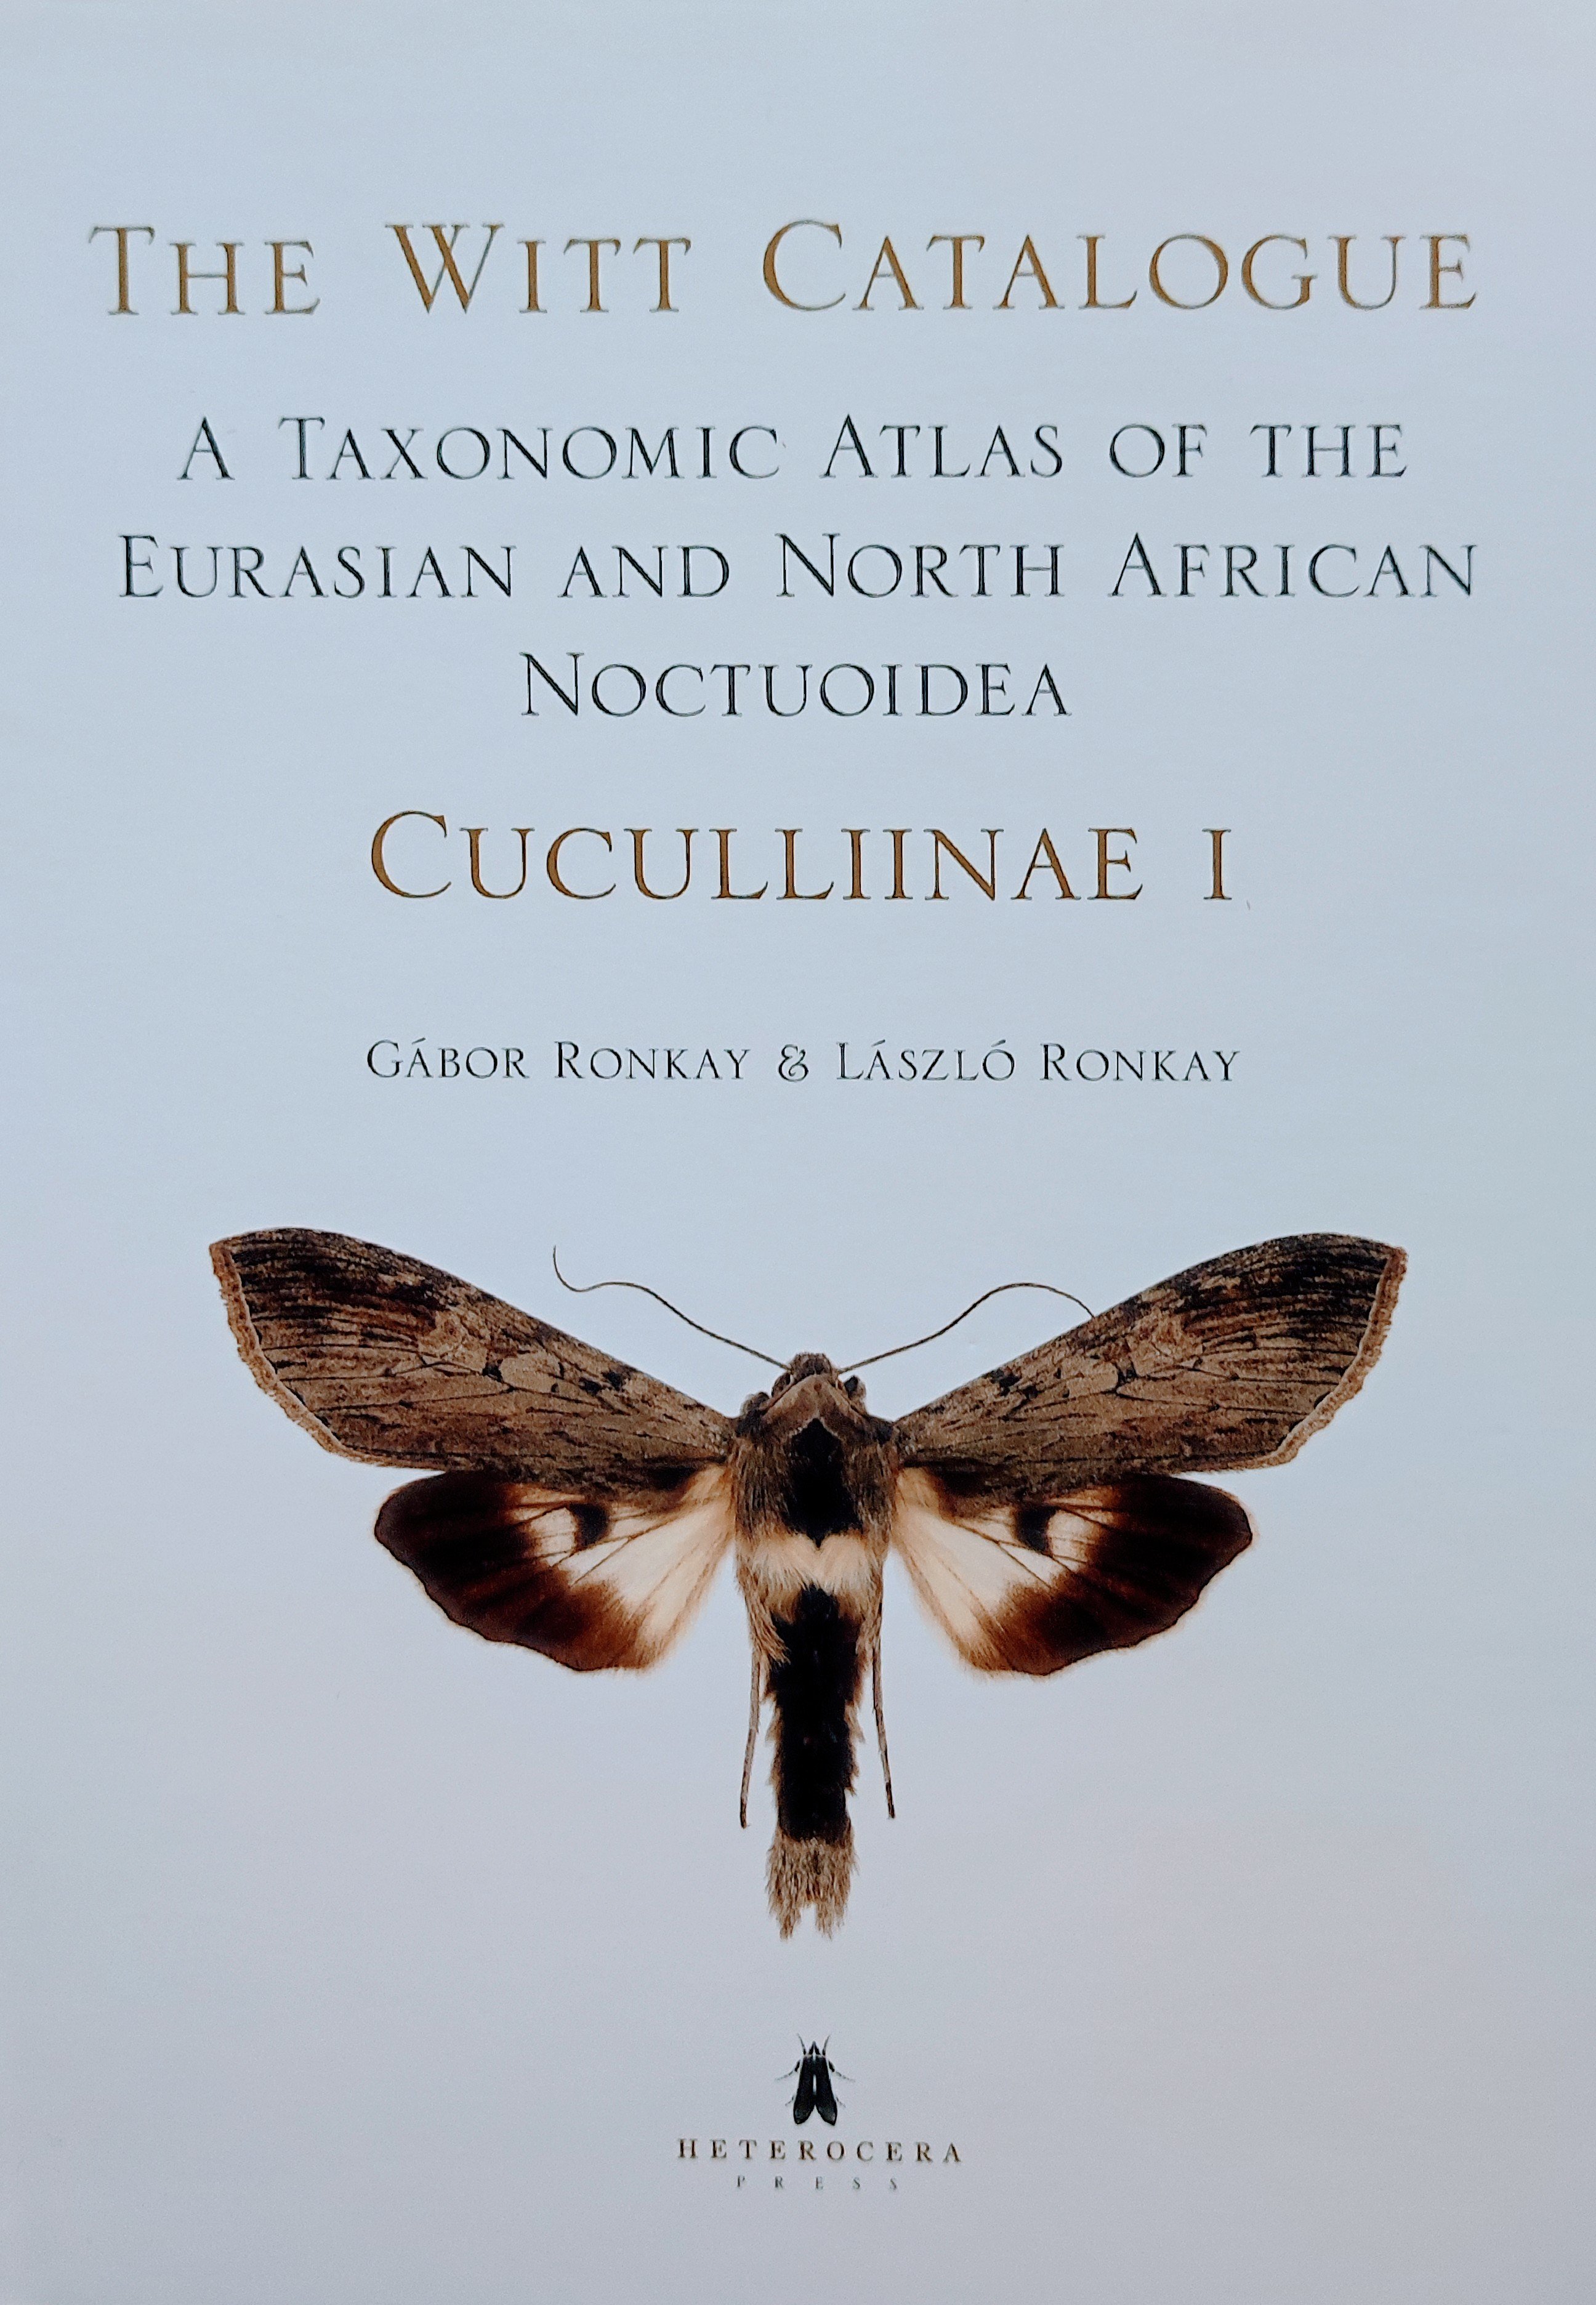 The Witt Catalogue: A Taxonomic Atlas of the Eurasian and North African Noctuoidea. volume 2. - Cuculliinae 1. (Rippl-Rónai Múzeum CC BY-NC-ND)